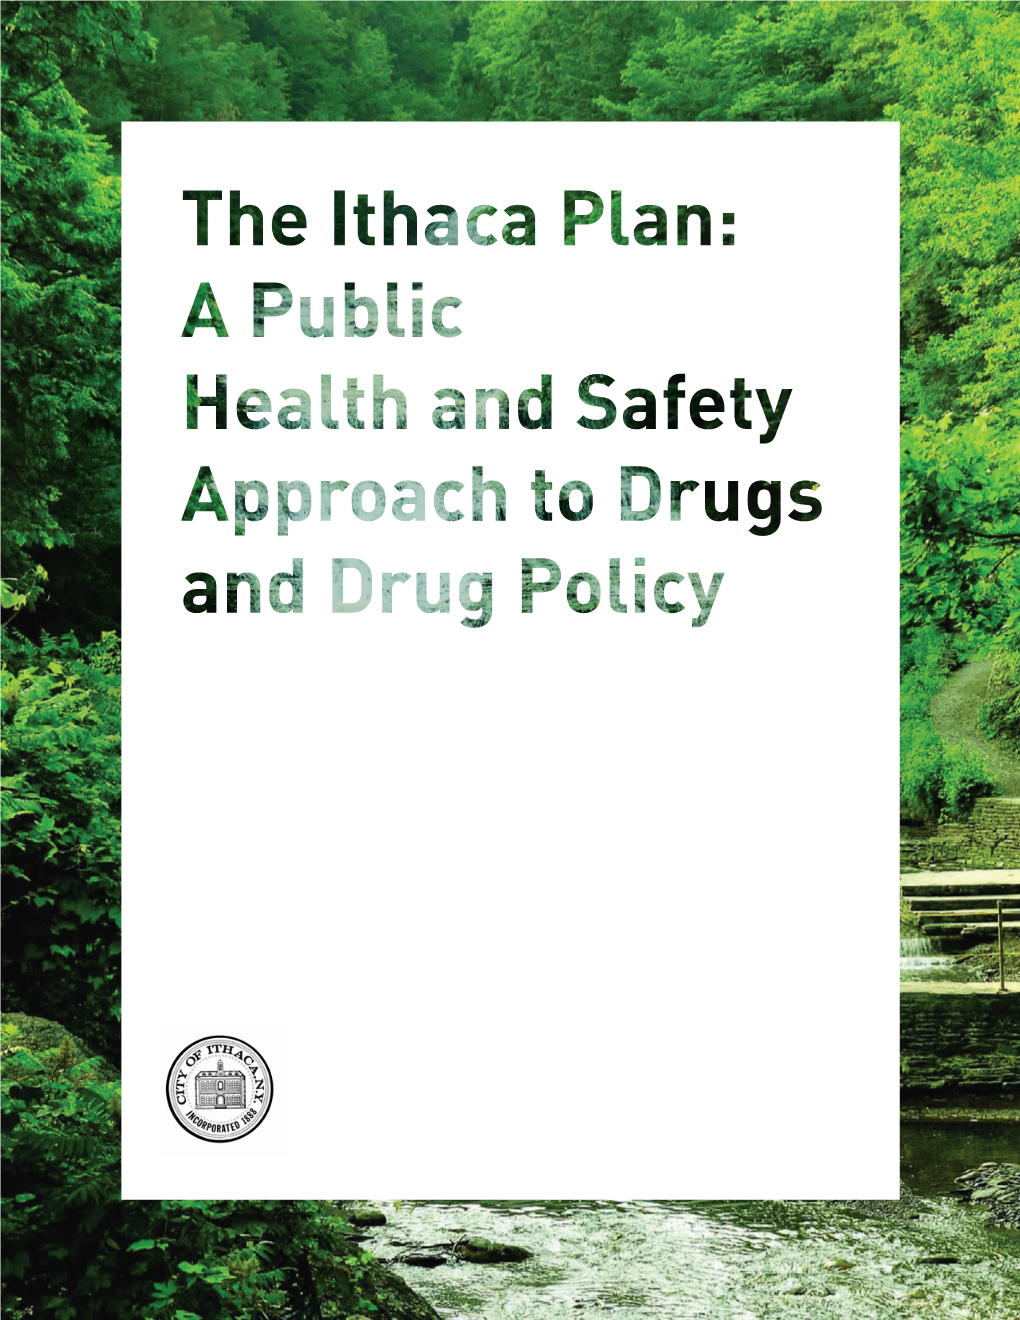 A Public Health and Safety Approach to Drugs and Drug Policy